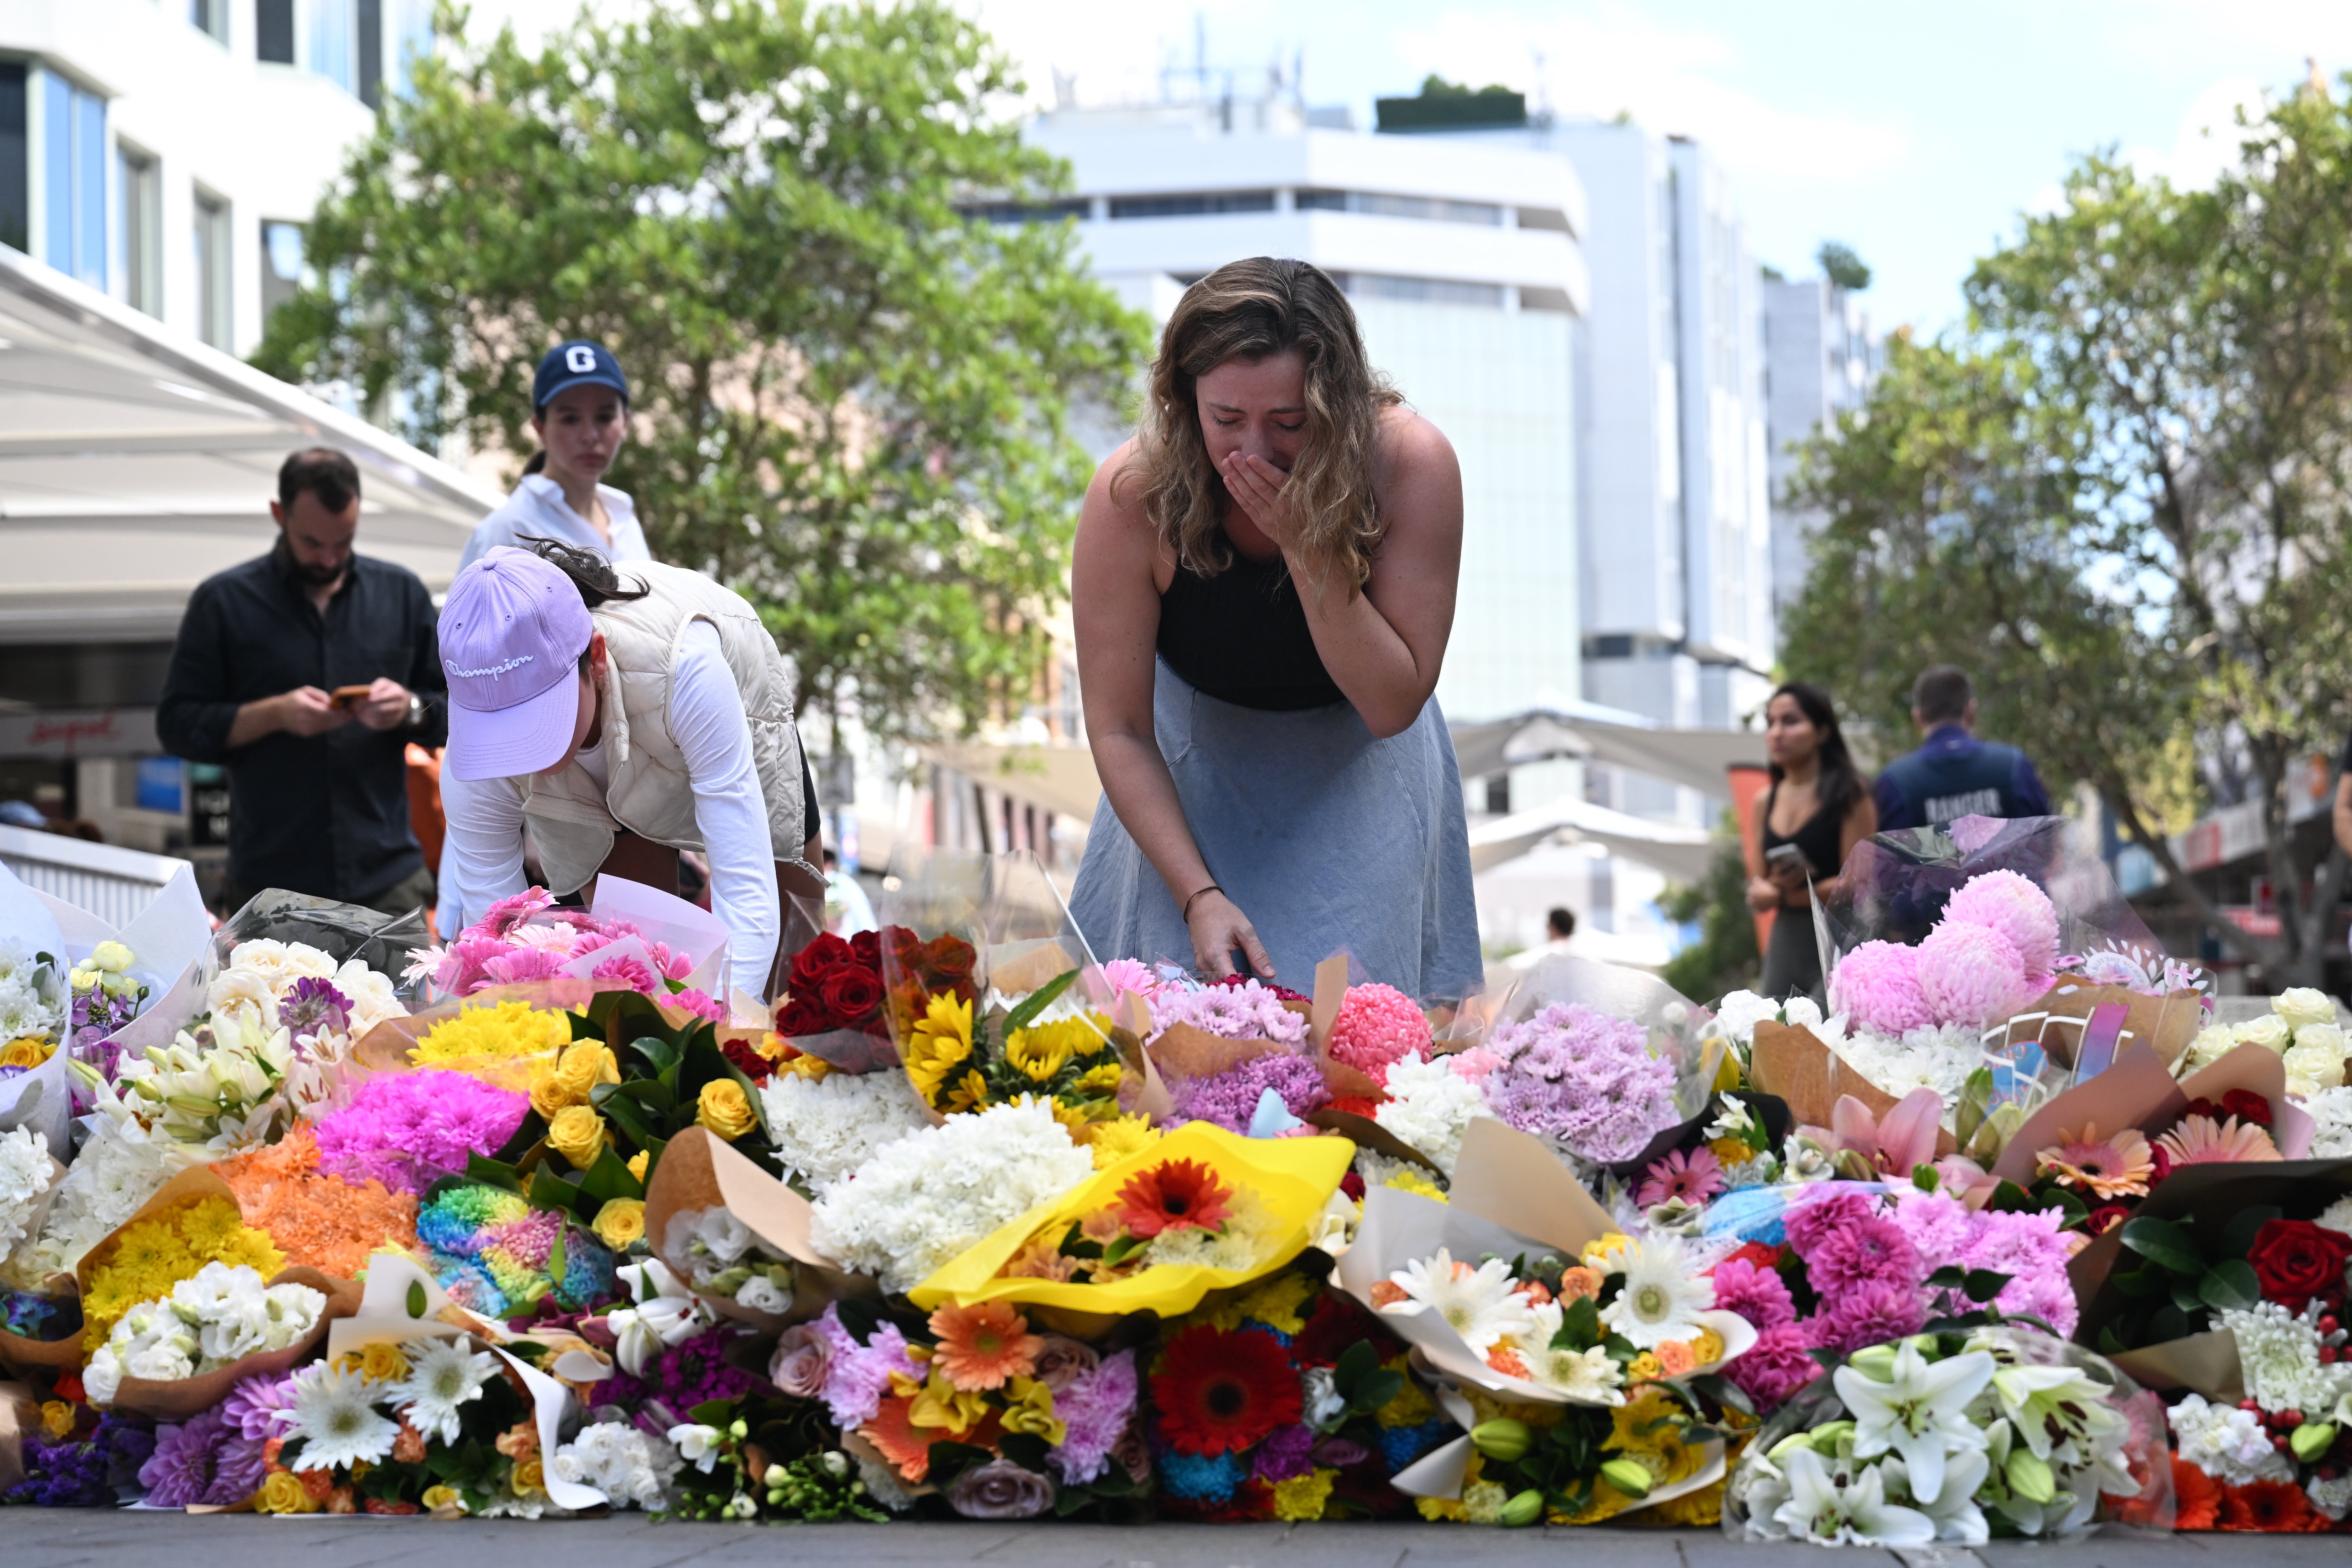 People pay their respects at the scene of the 13 April stabbing rampage at Bondi Junction in Sydney